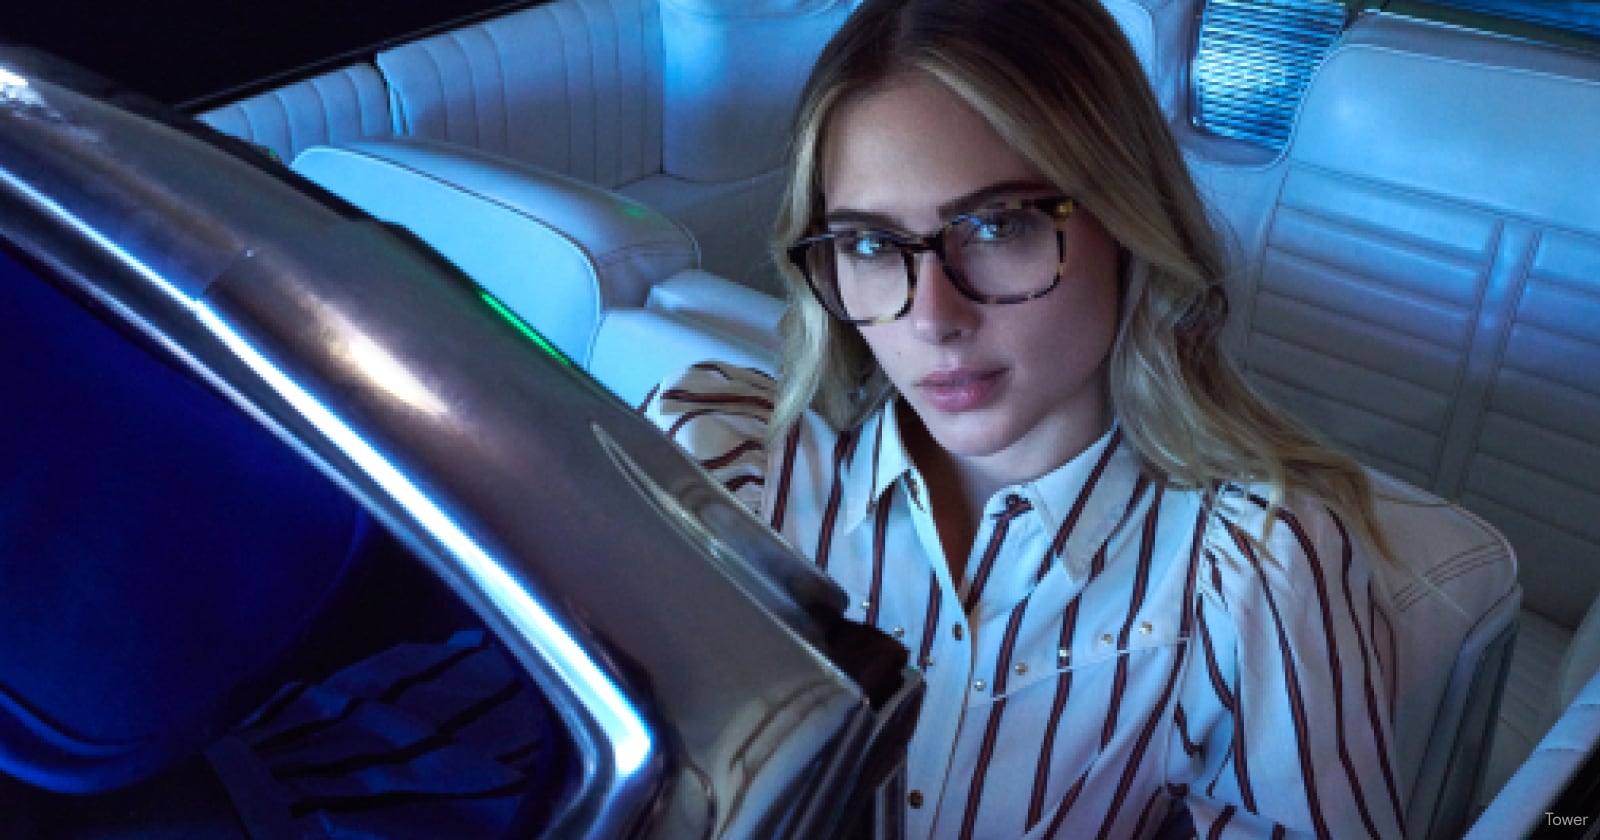 A woman wearing night driving glasses